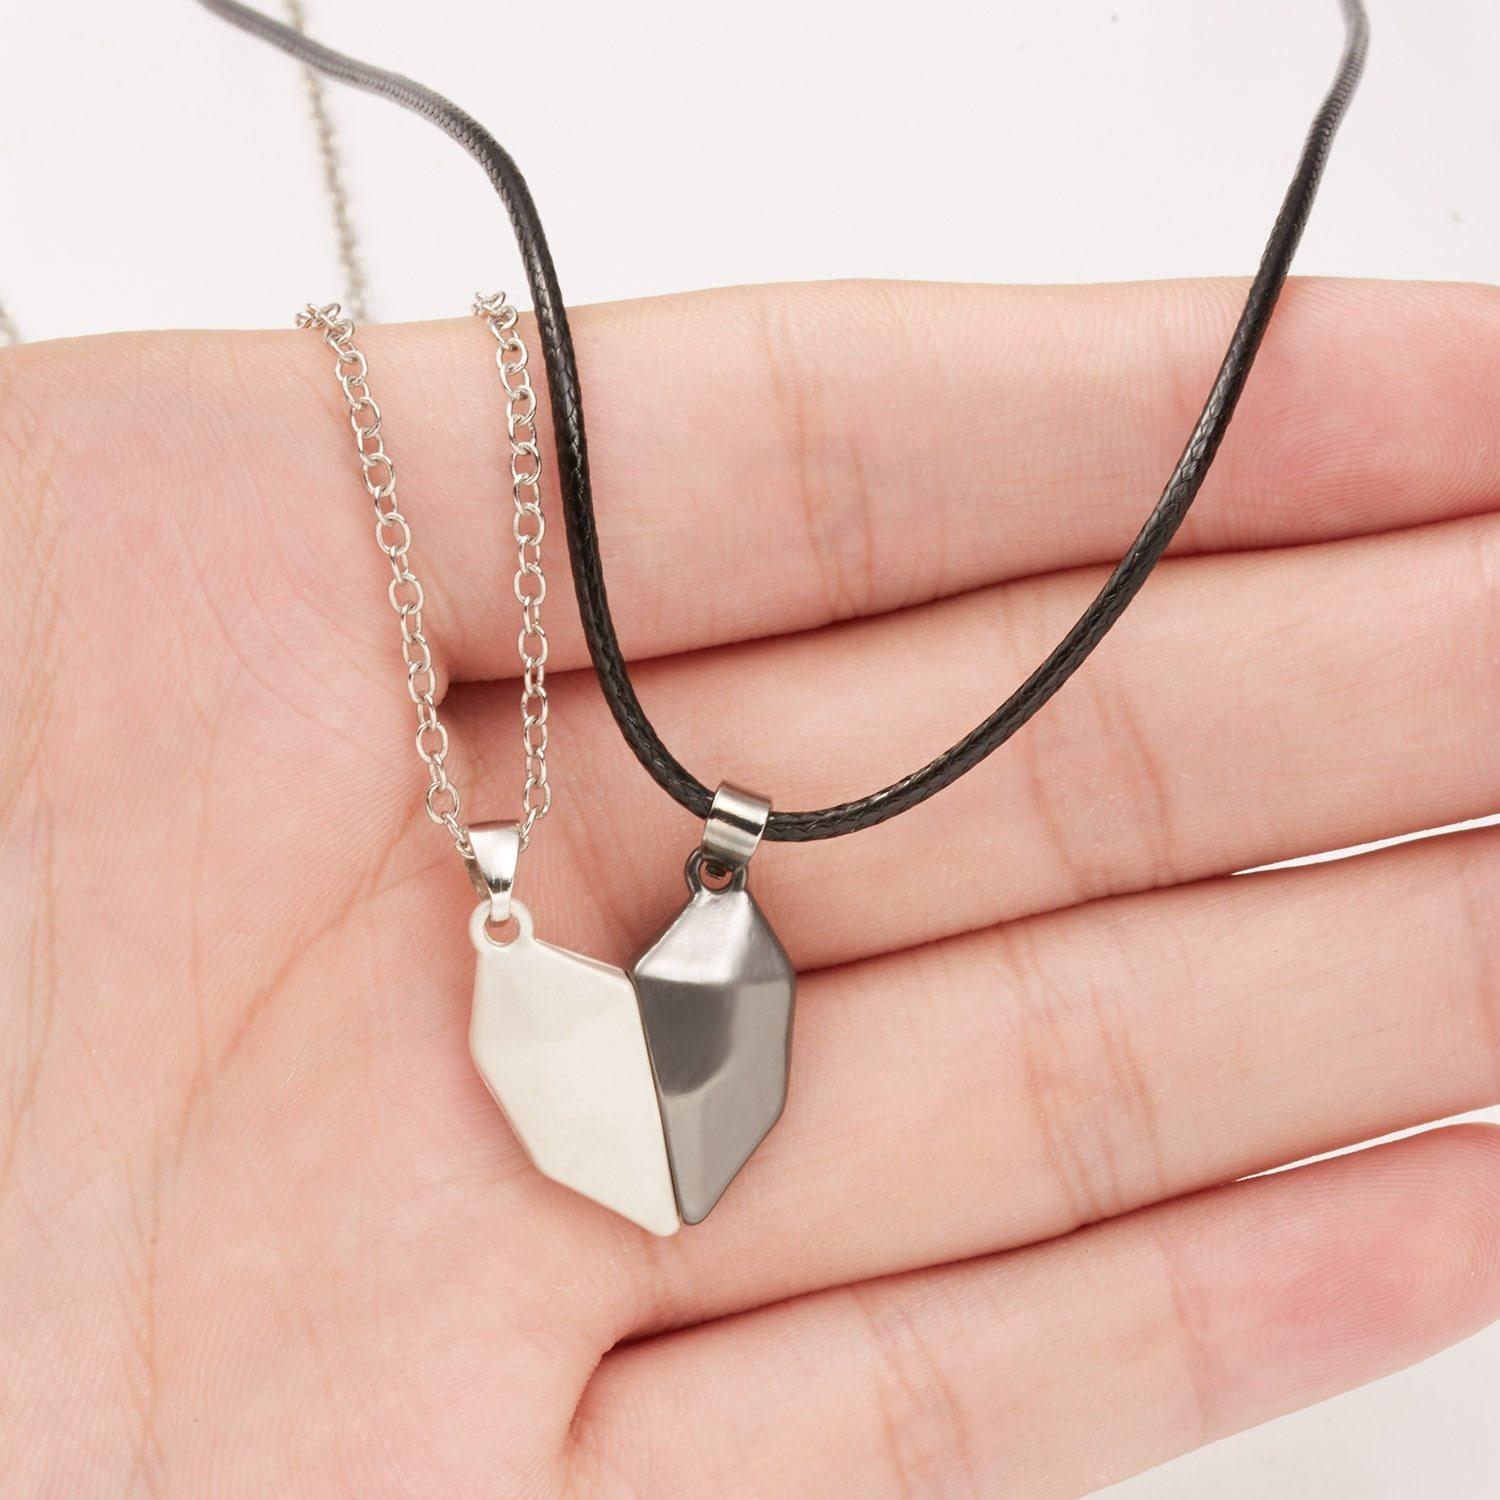 Matching Relationship Necklaces For My Girlfriend in 2023 | Matching Relationship Necklaces For My Girlfriend - undefined | gift, gift ideas, Magnetic Couple Necklace, necklace, Necklaces, other necklace | From Hunny Life | hunnylife.com